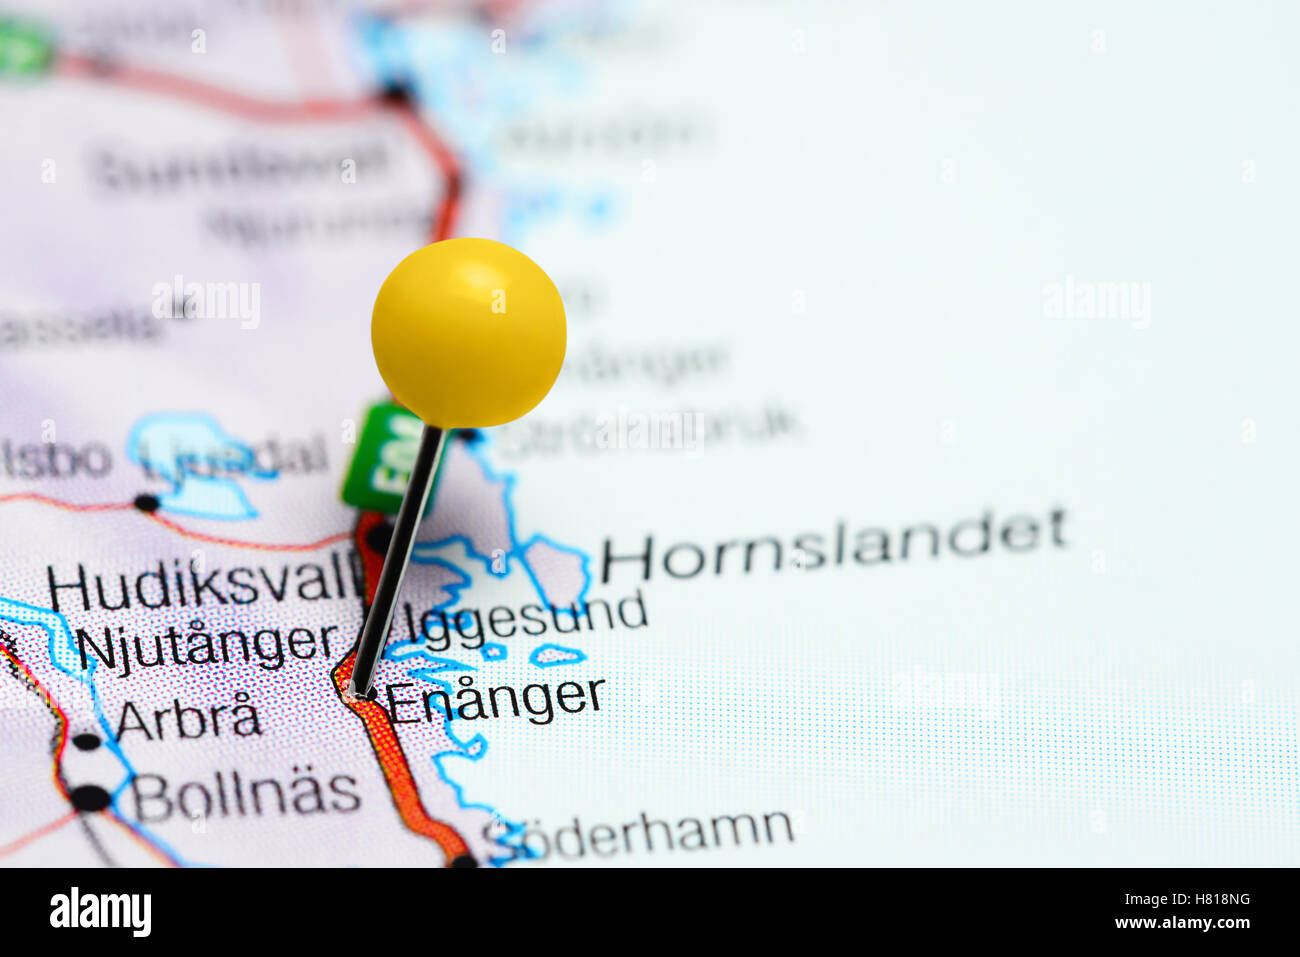 Enanger pinned on a map of Sweden Stock Photo